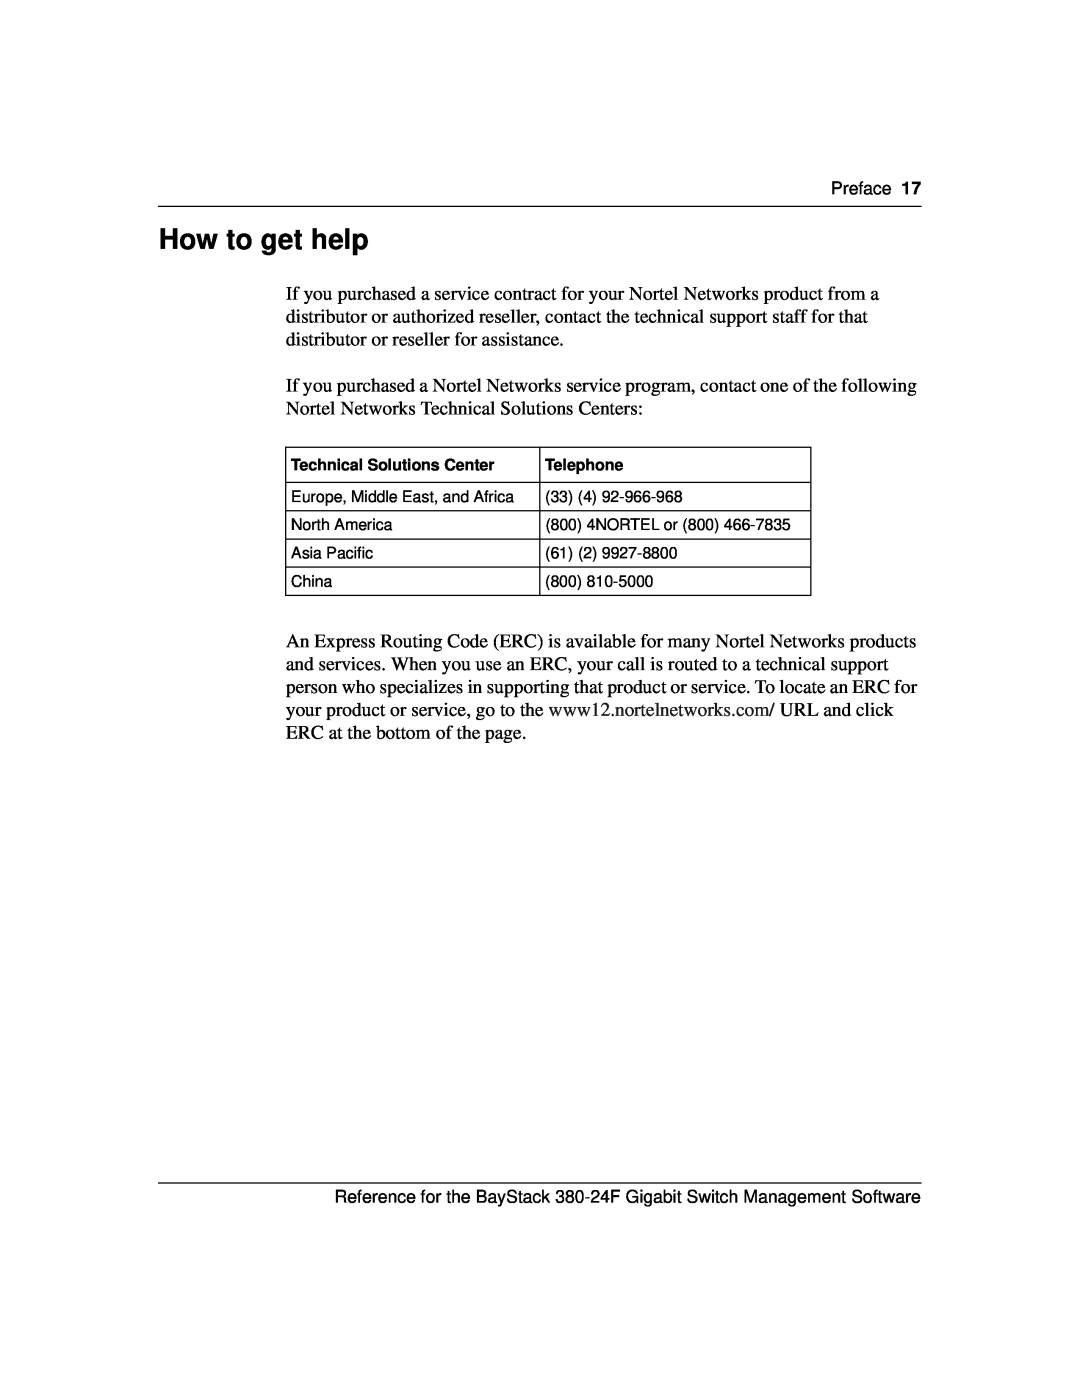 Nortel Networks 214393-A manual How to get help, Preface 